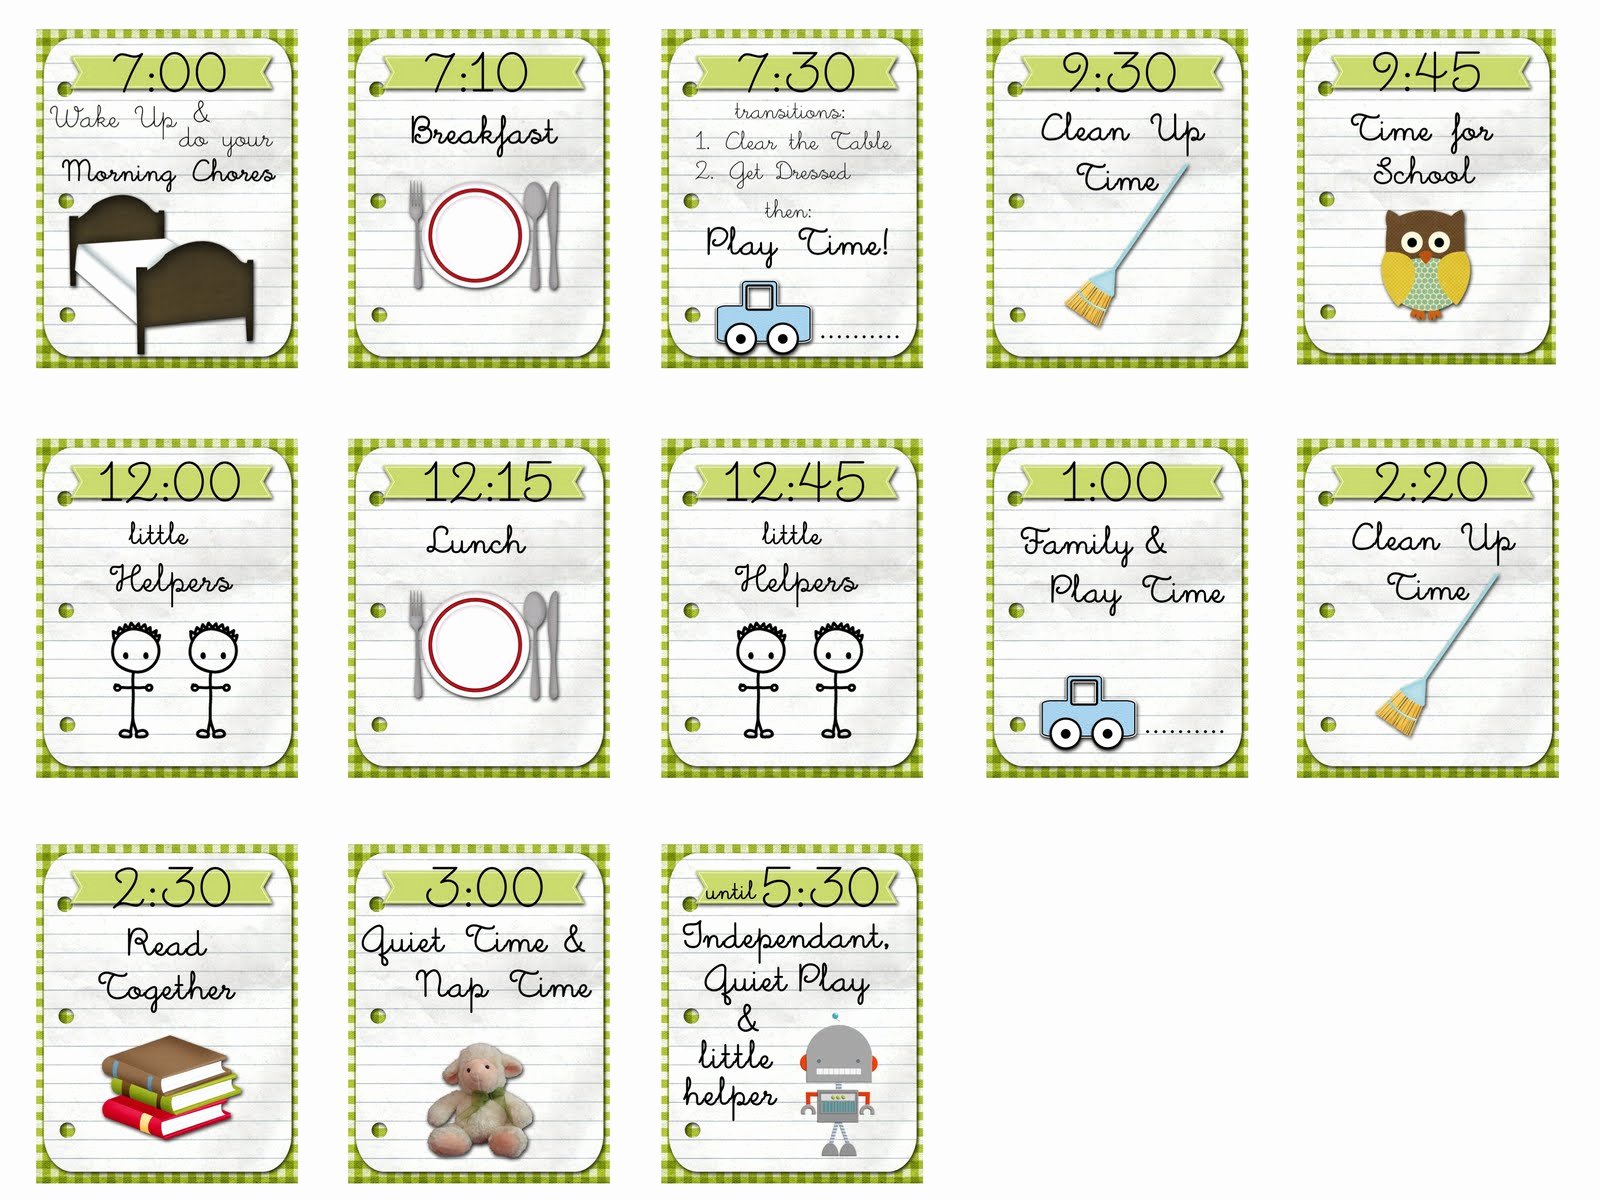 Daily Schedule Template for Kids Luxury the Only Thing Worth Walking toward Our Daily Schedule